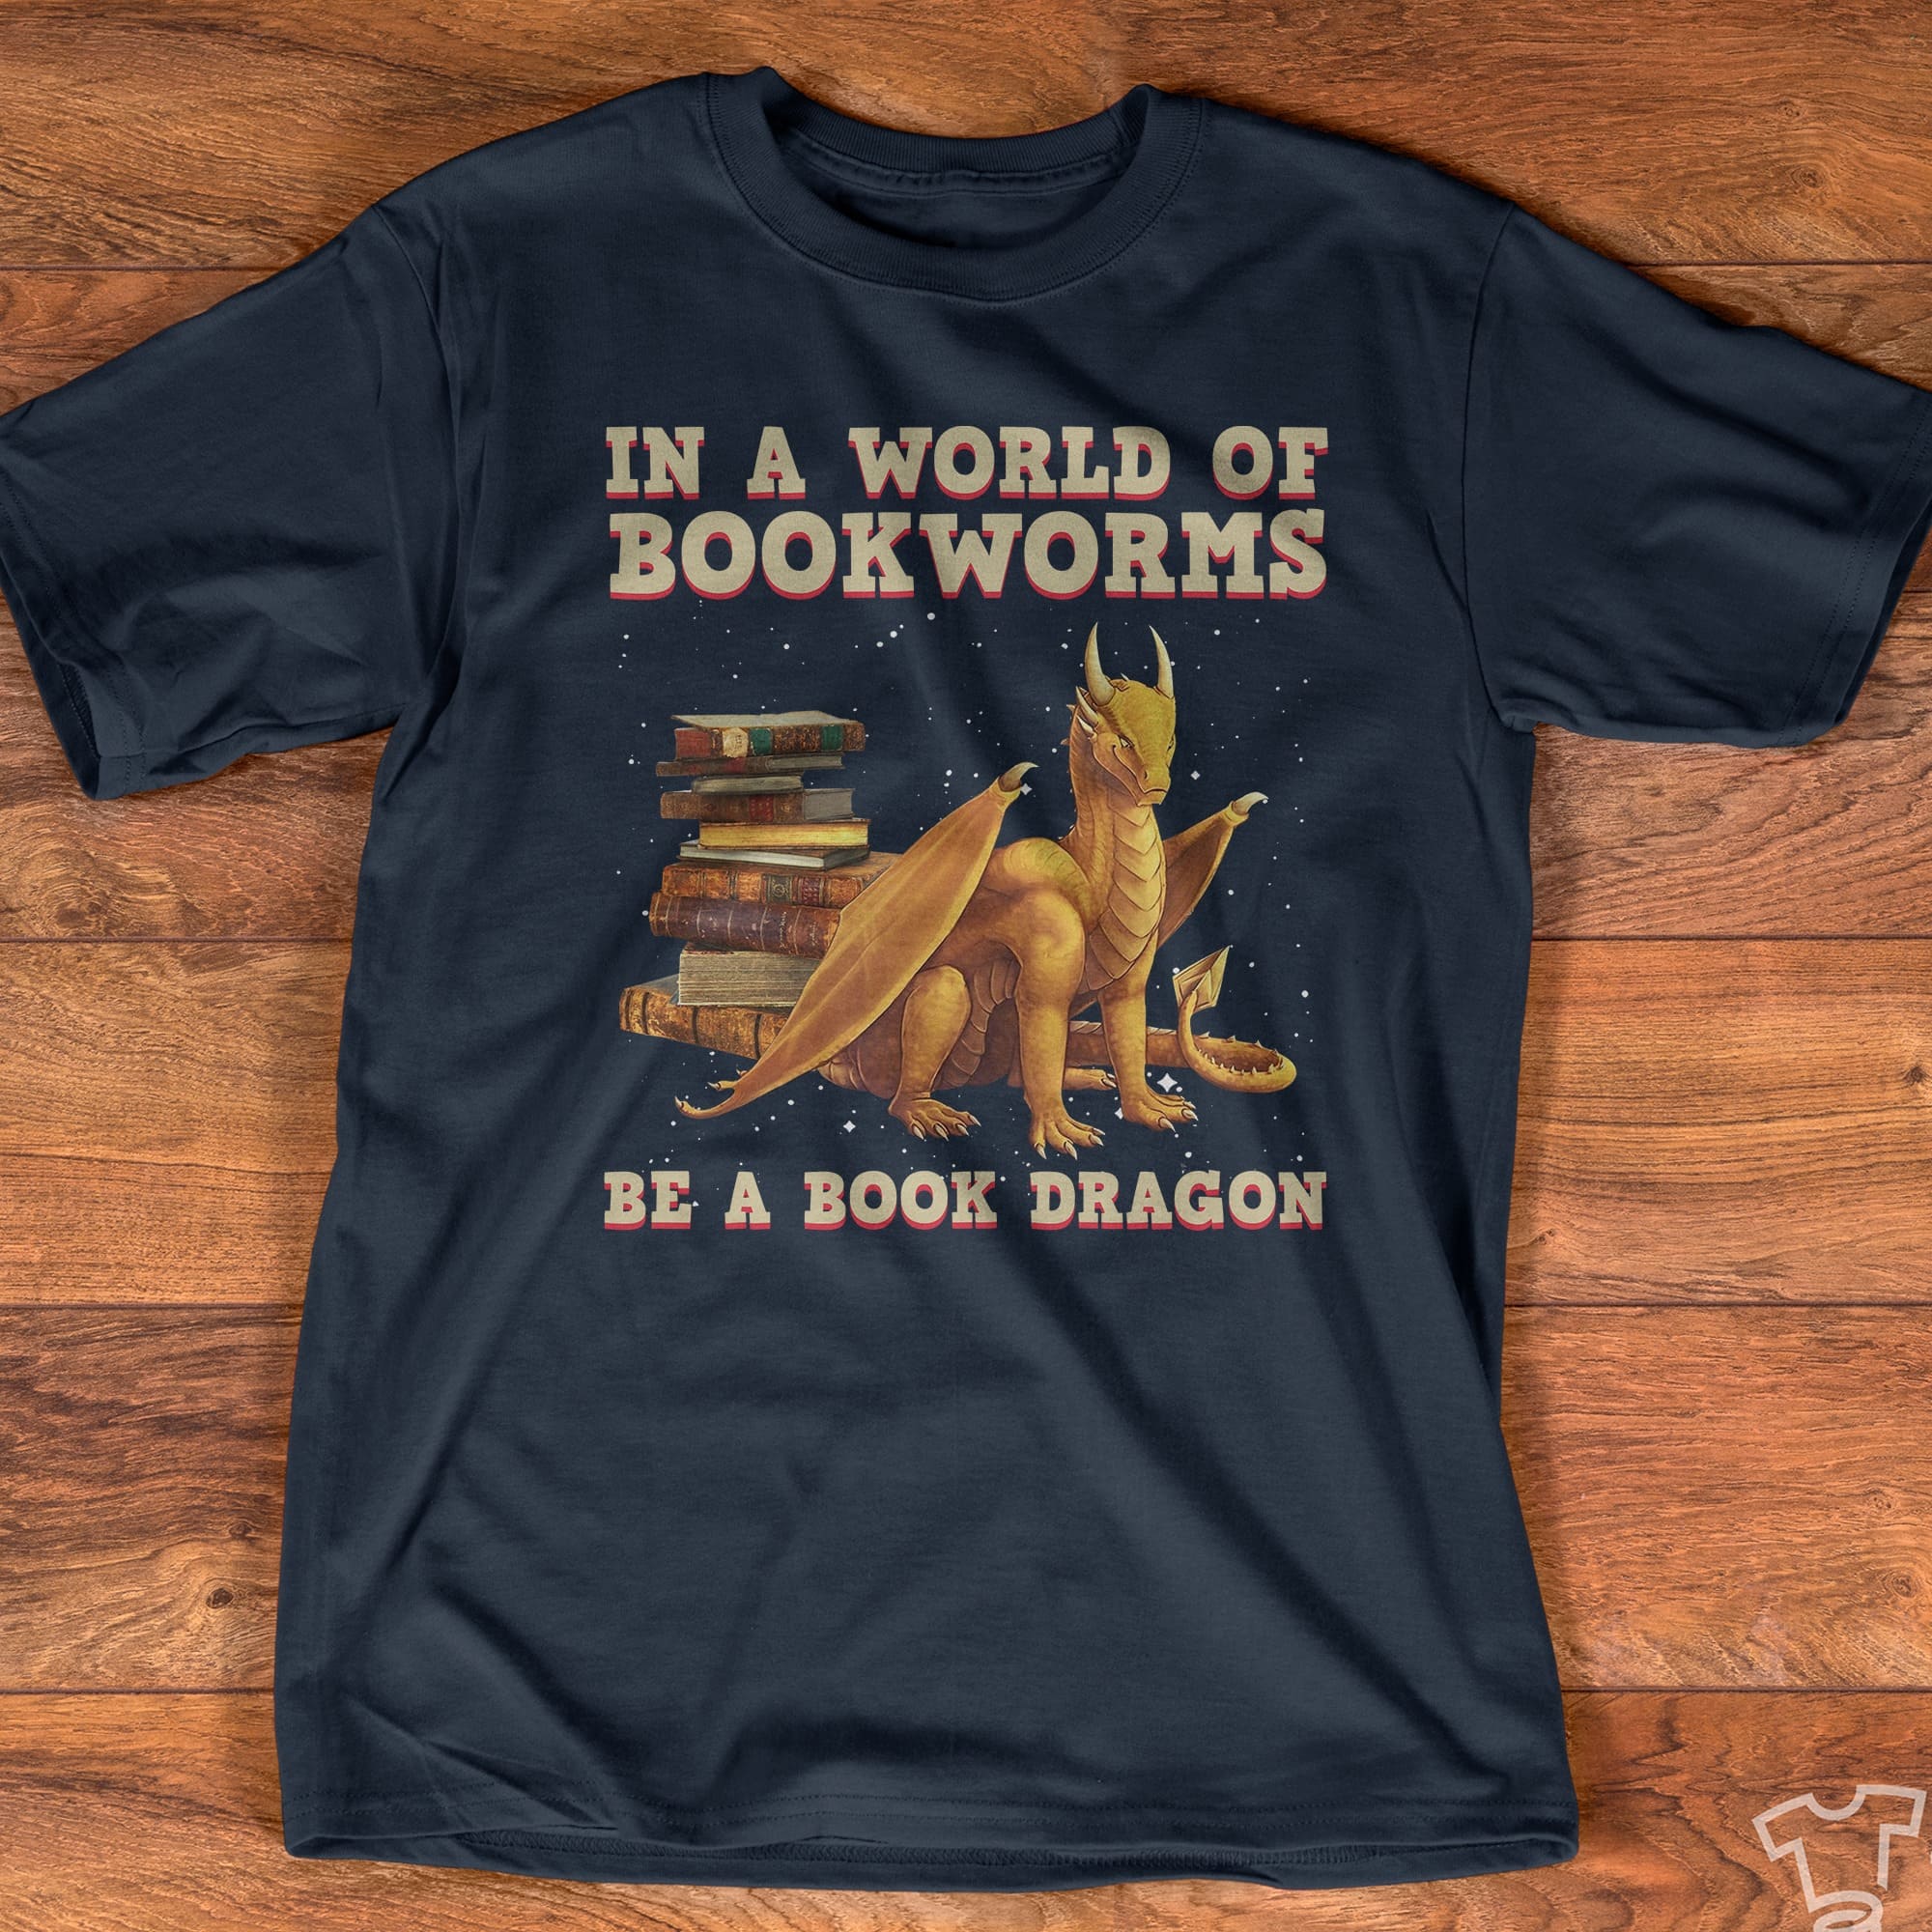 Dragon Book - In a world of bookworms be a book dragon